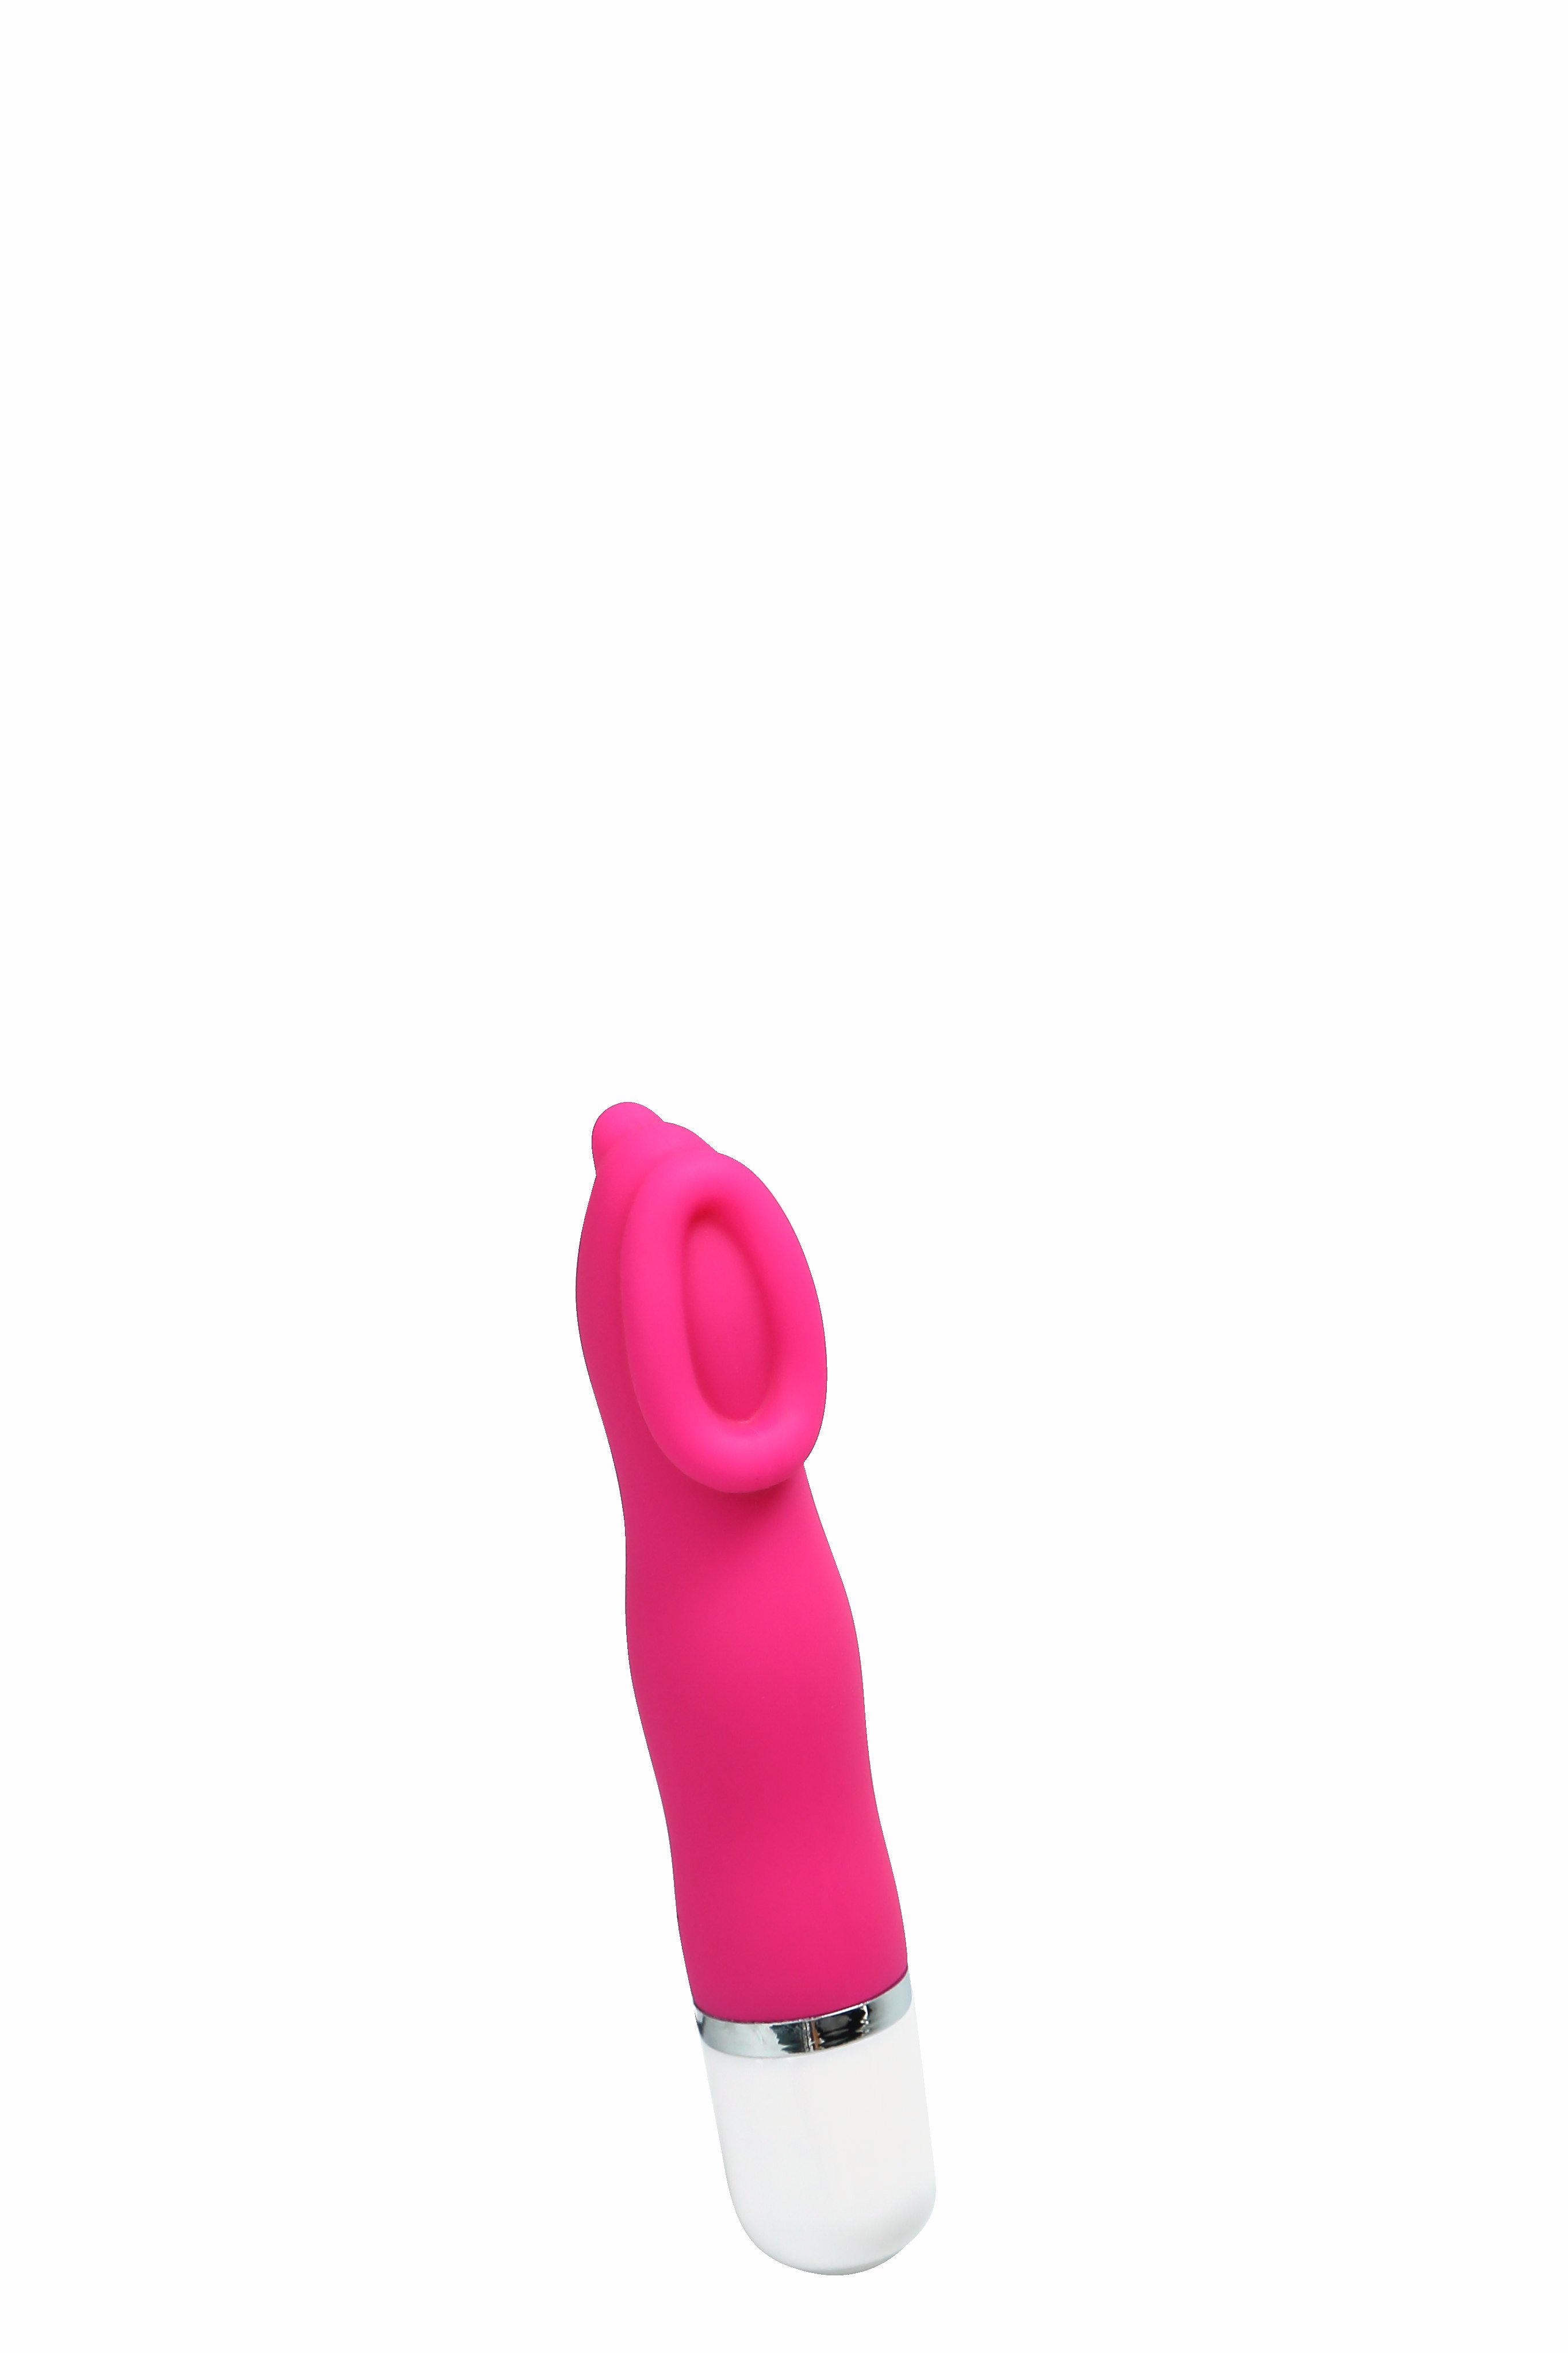 VEDO LUV MINI VIBE HOT IN BED PINK 